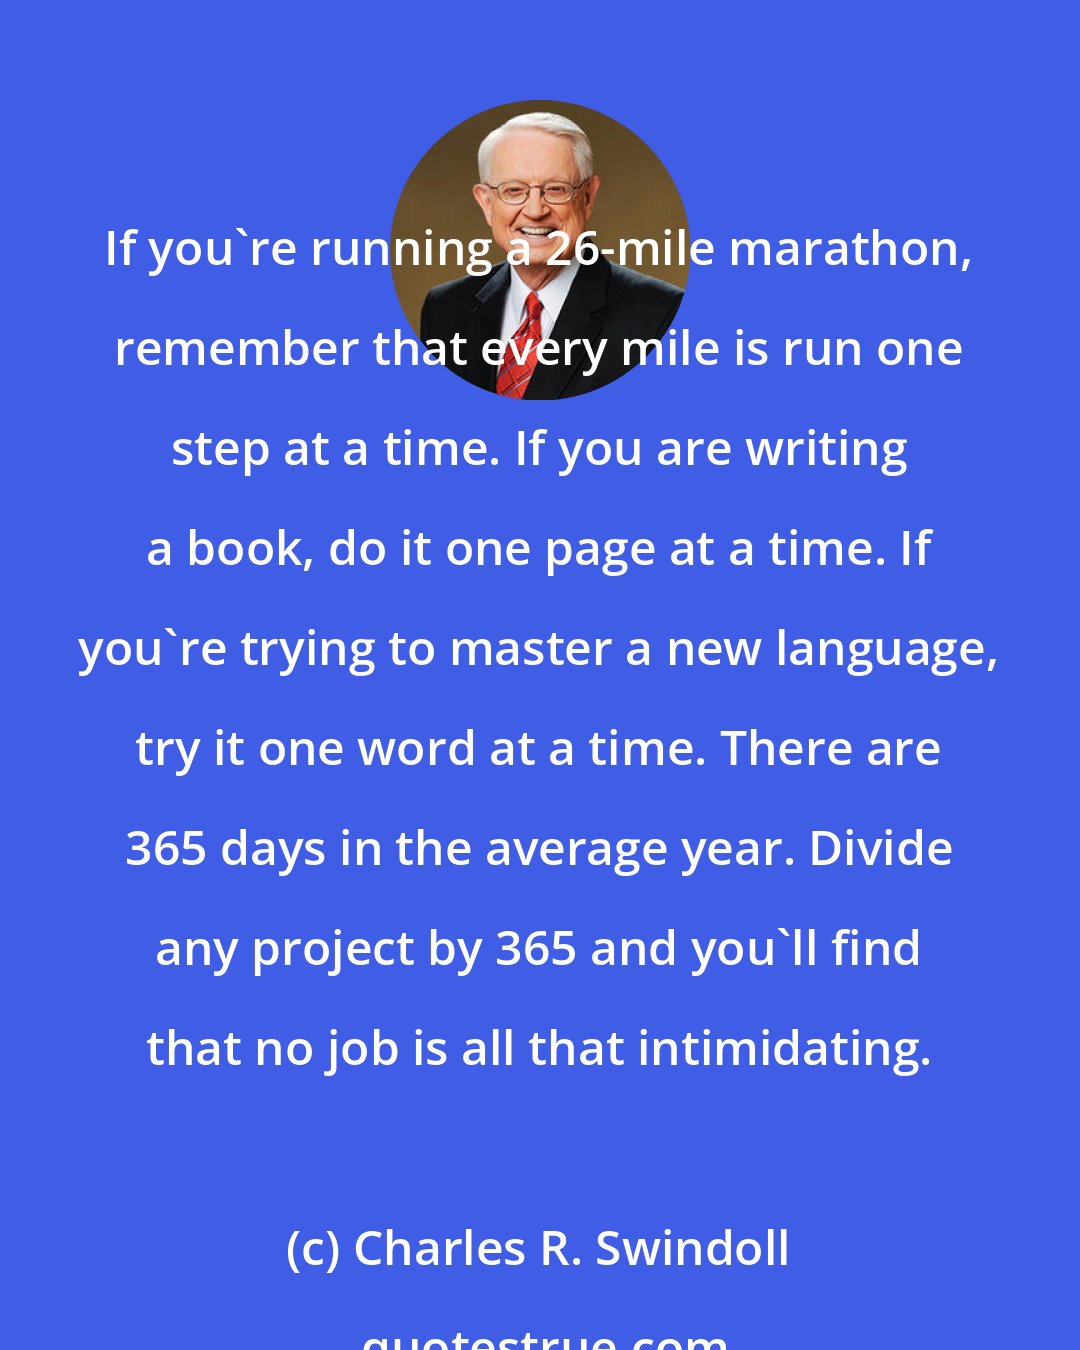 Charles R. Swindoll: If you're running a 26-mile marathon, remember that every mile is run one step at a time. If you are writing a book, do it one page at a time. If you're trying to master a new language, try it one word at a time. There are 365 days in the average year. Divide any project by 365 and you'll find that no job is all that intimidating.